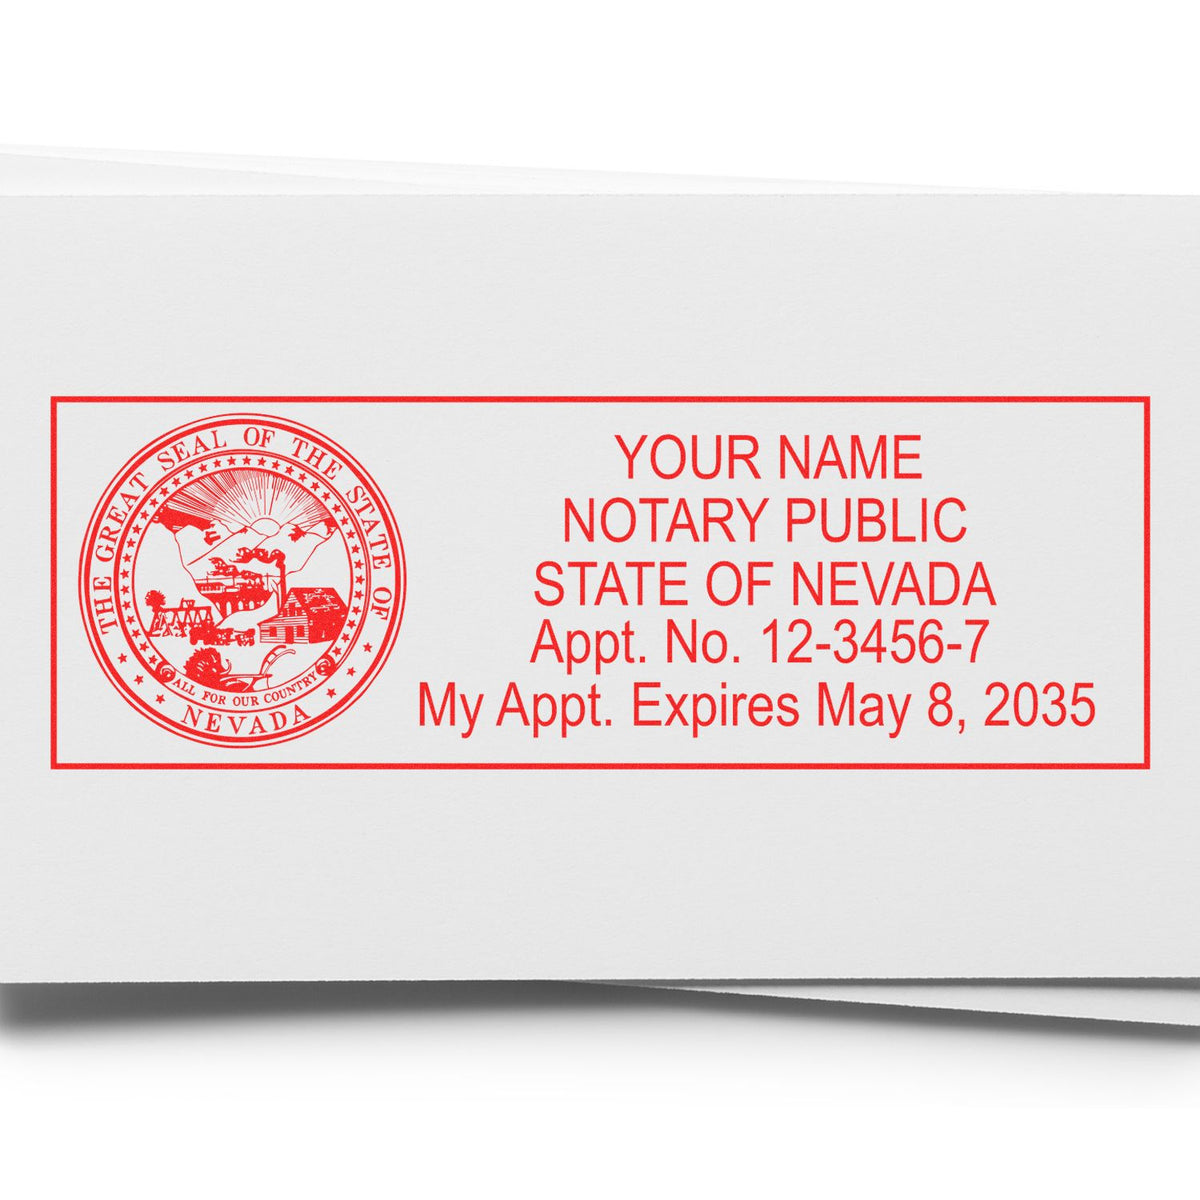 An alternative view of the Slim Pre-Inked State Seal Notary Stamp for Nevada stamped on a sheet of paper showing the image in use